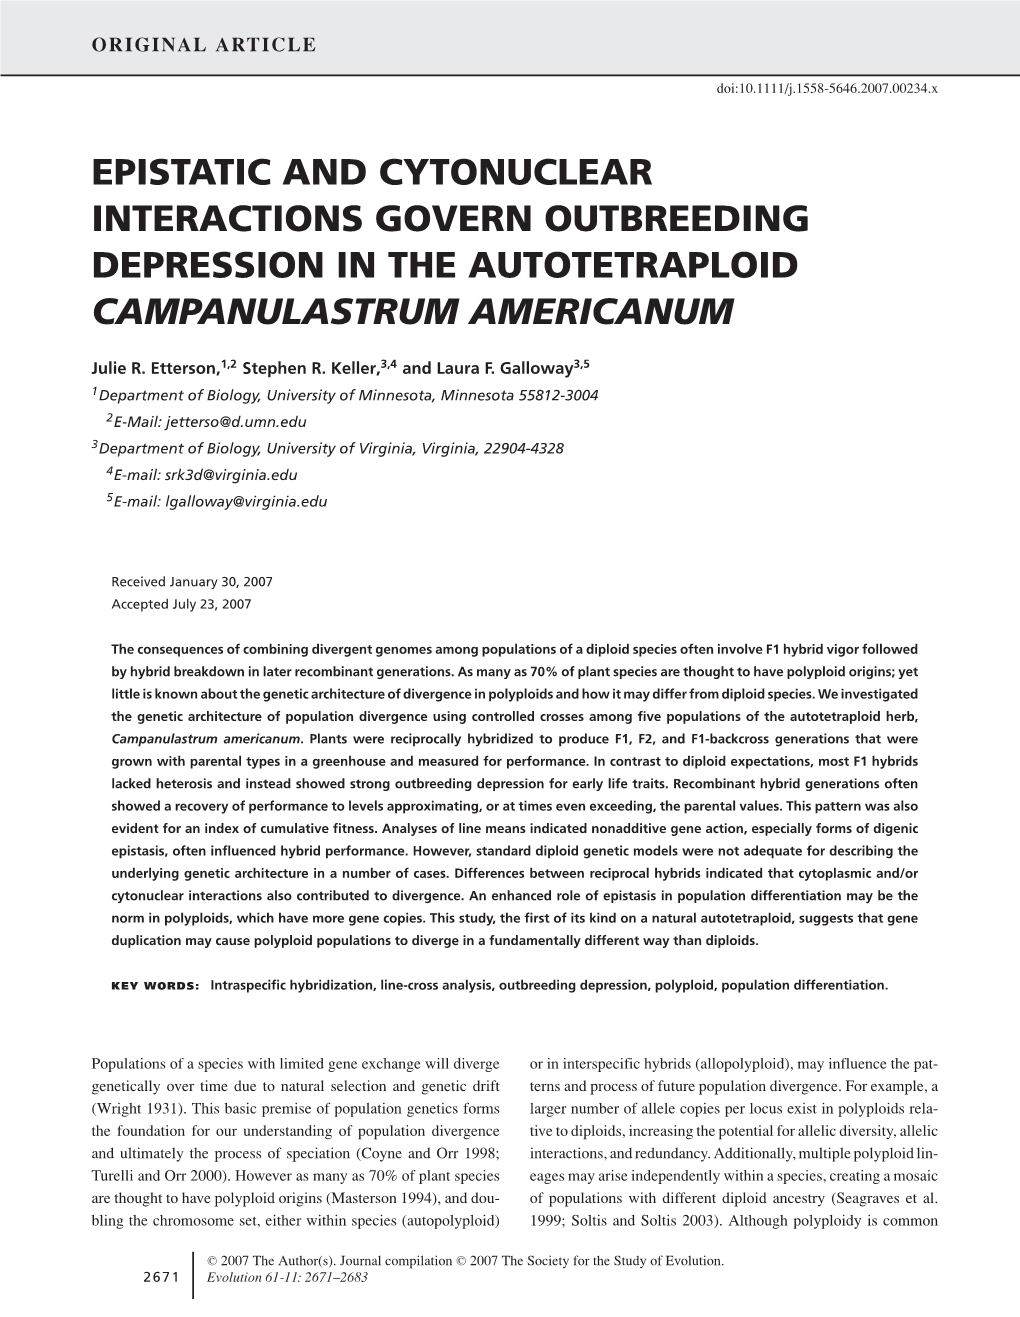 Epistatic and Cytonuclear Interactions Govern Outbreeding Depression in the Autotetraploid Campanulastrum Americanum